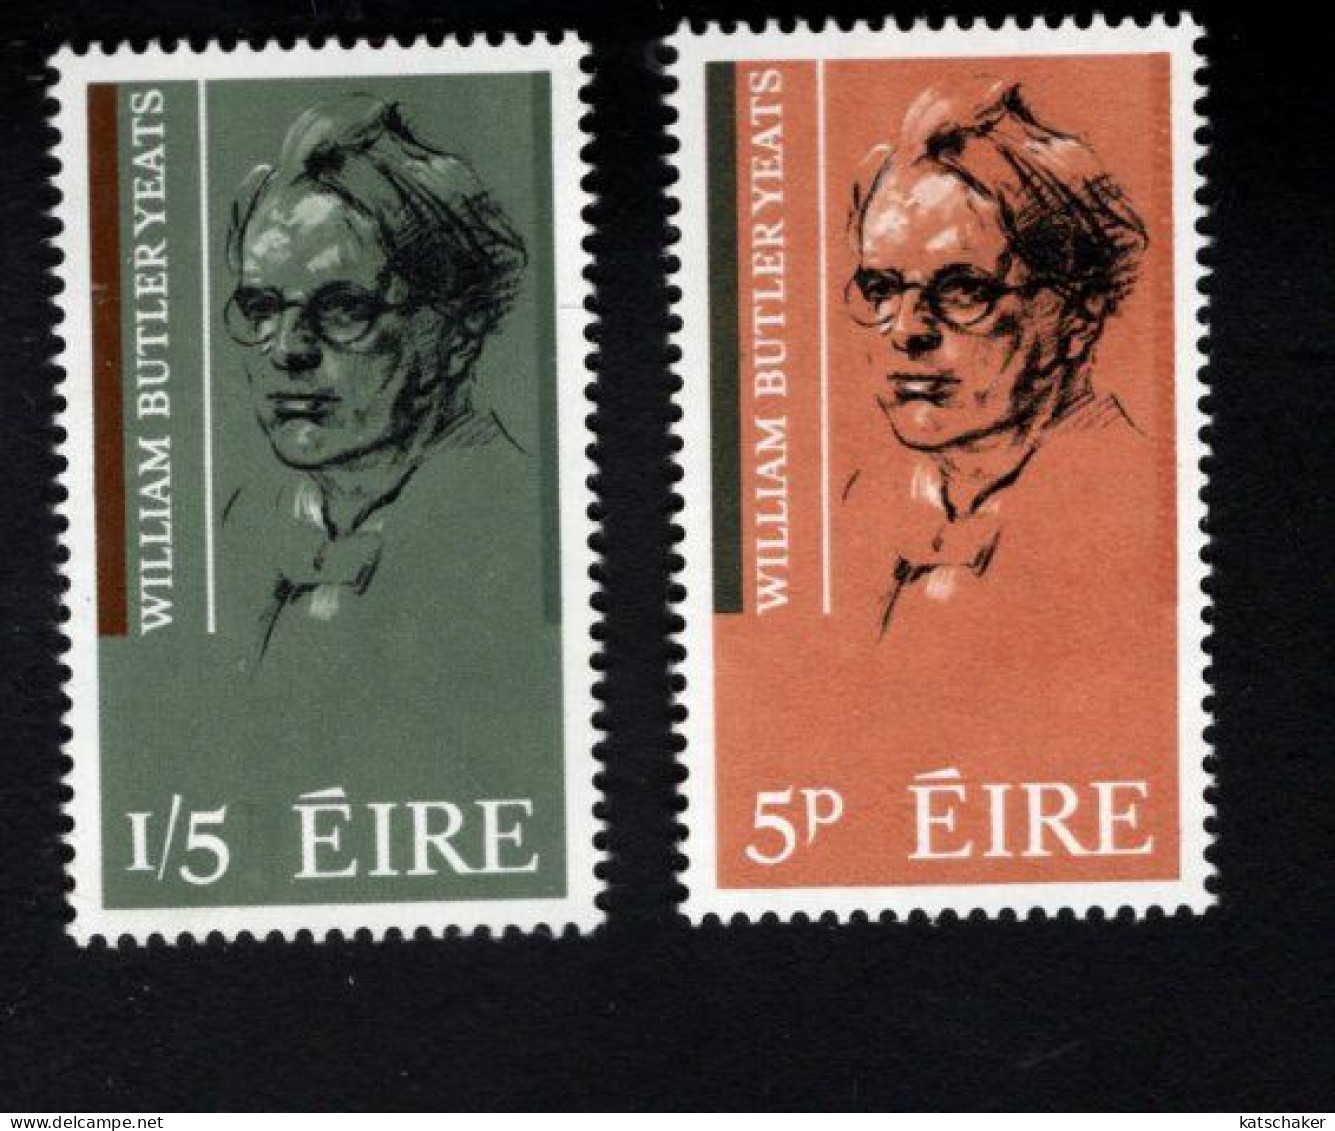 2000940239 1965  SCOTT 200 201 (XX) POSTFRIS  MINT NEVER HINGED - WILLIAM BUTLER YEATS - POET AND DRAMATIST - Unused Stamps